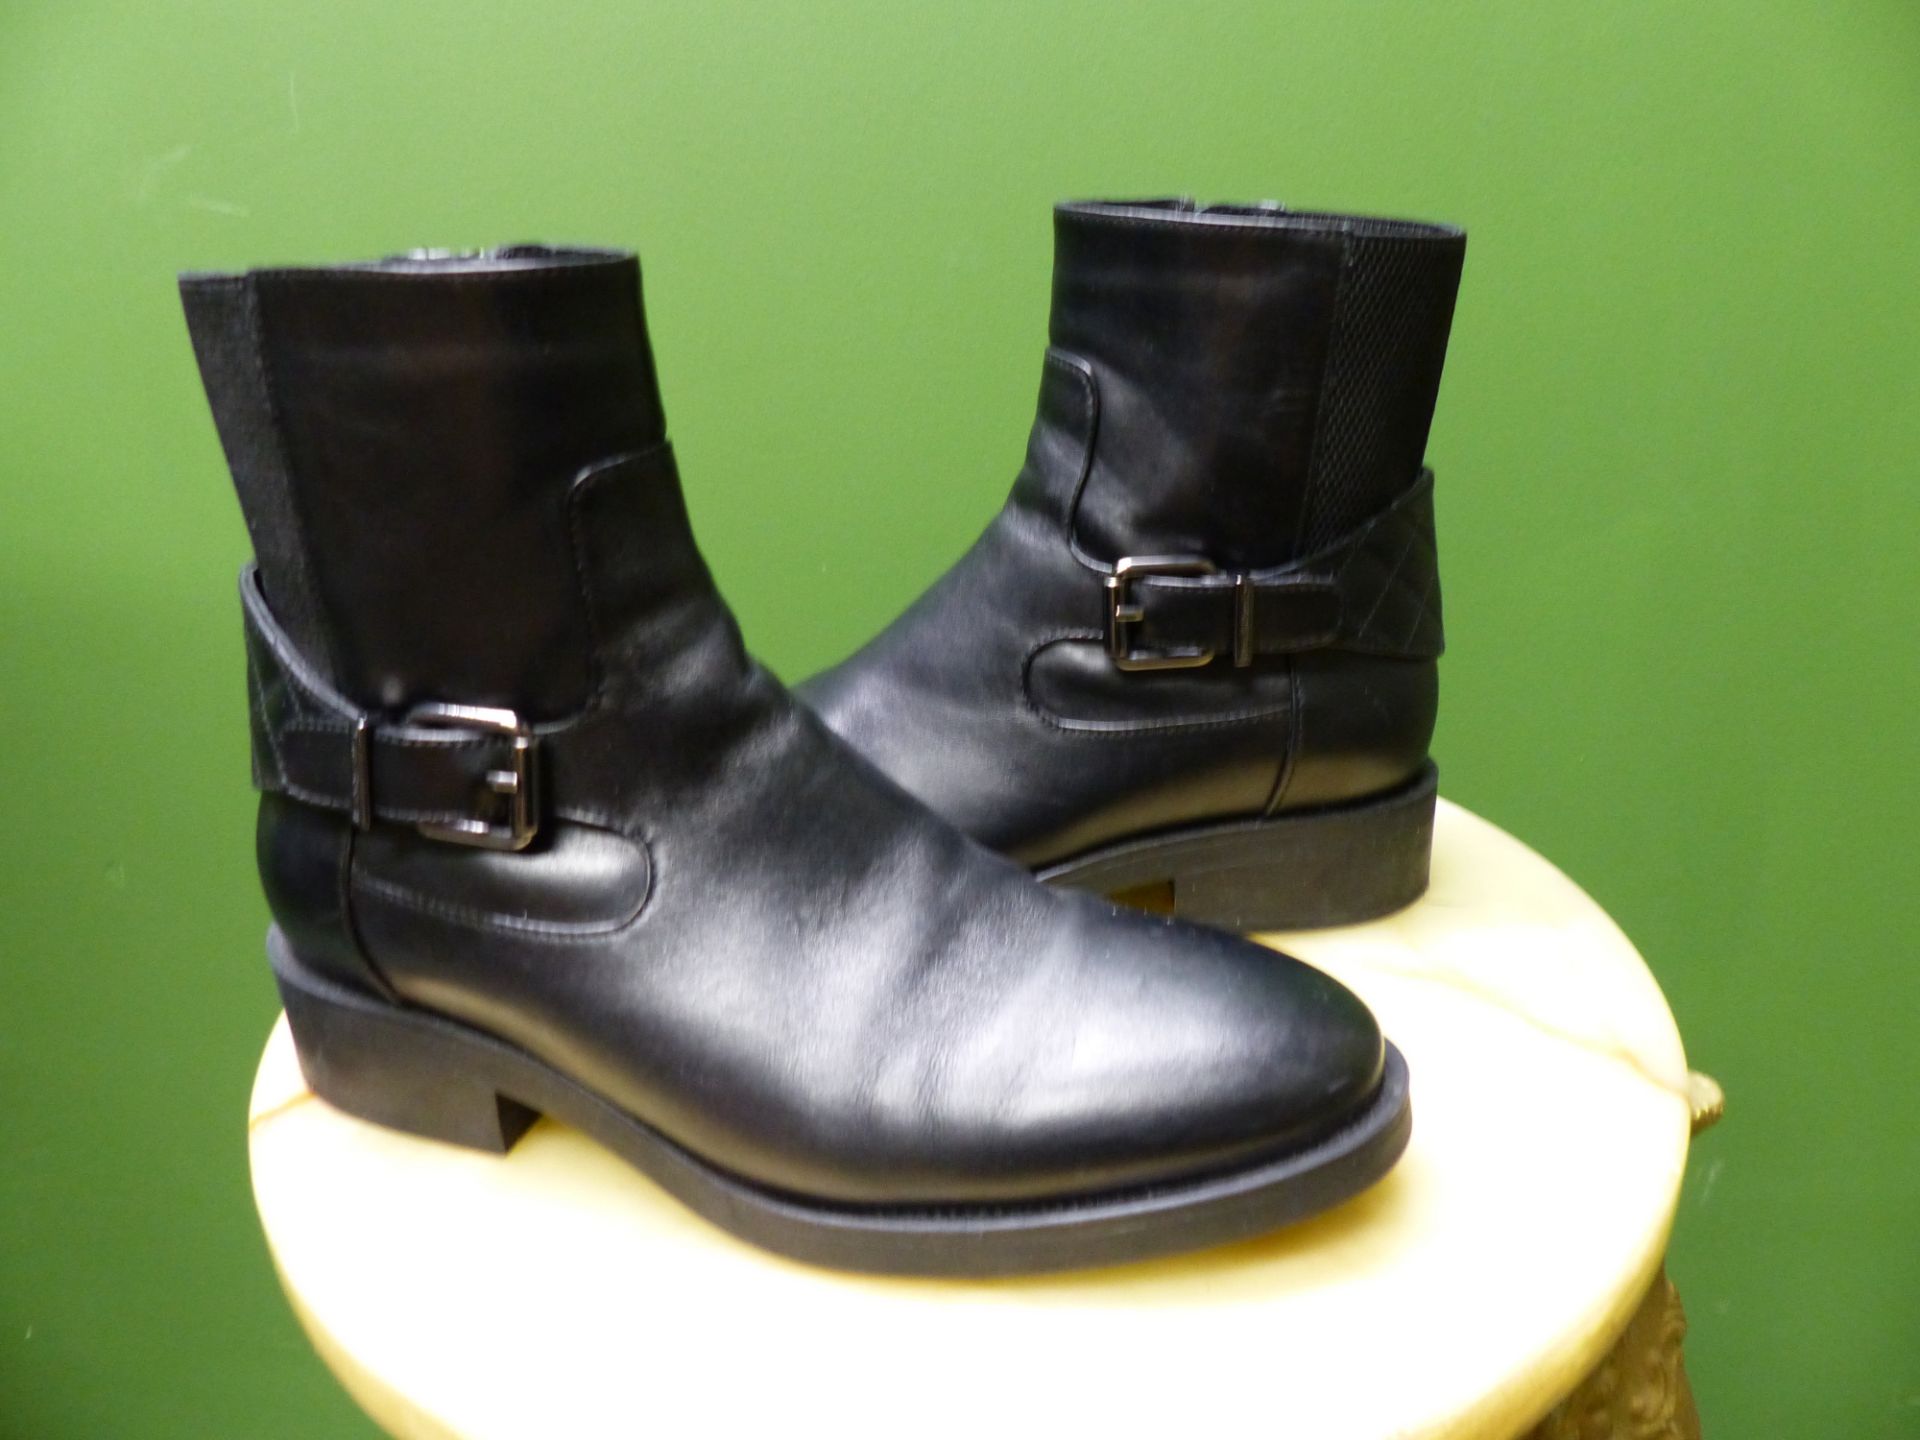 BOOTS. RUSSELL & BROMLEY BLACK UK SIZE 39. (WITH BOX)